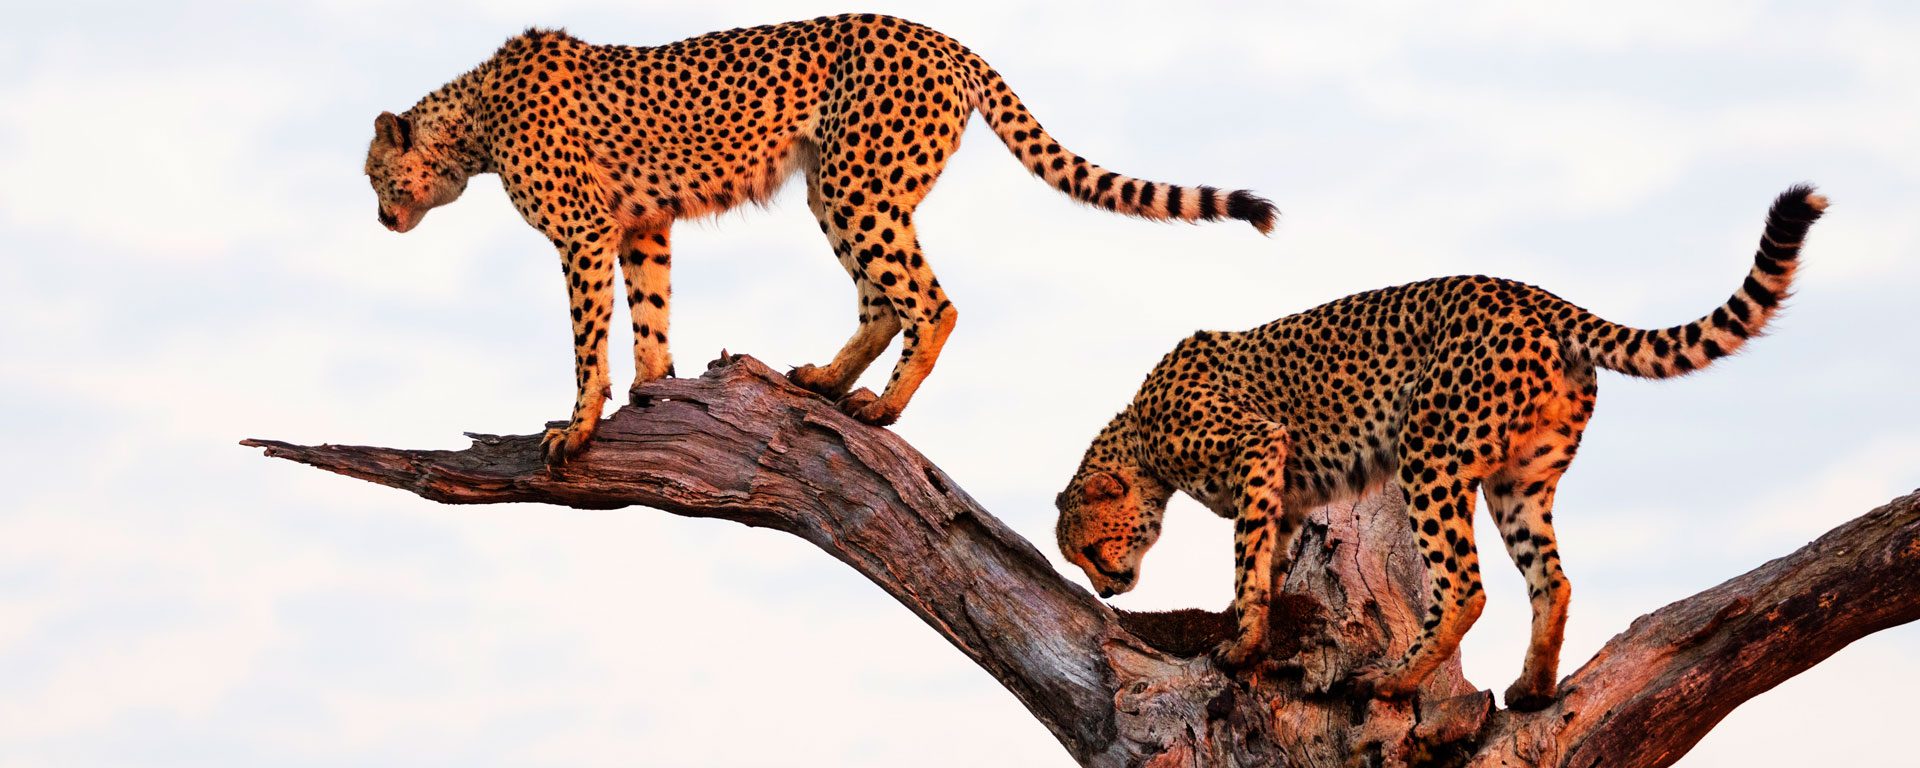 Two cheetahs perched on a tree in Kruger National Park, South Africa